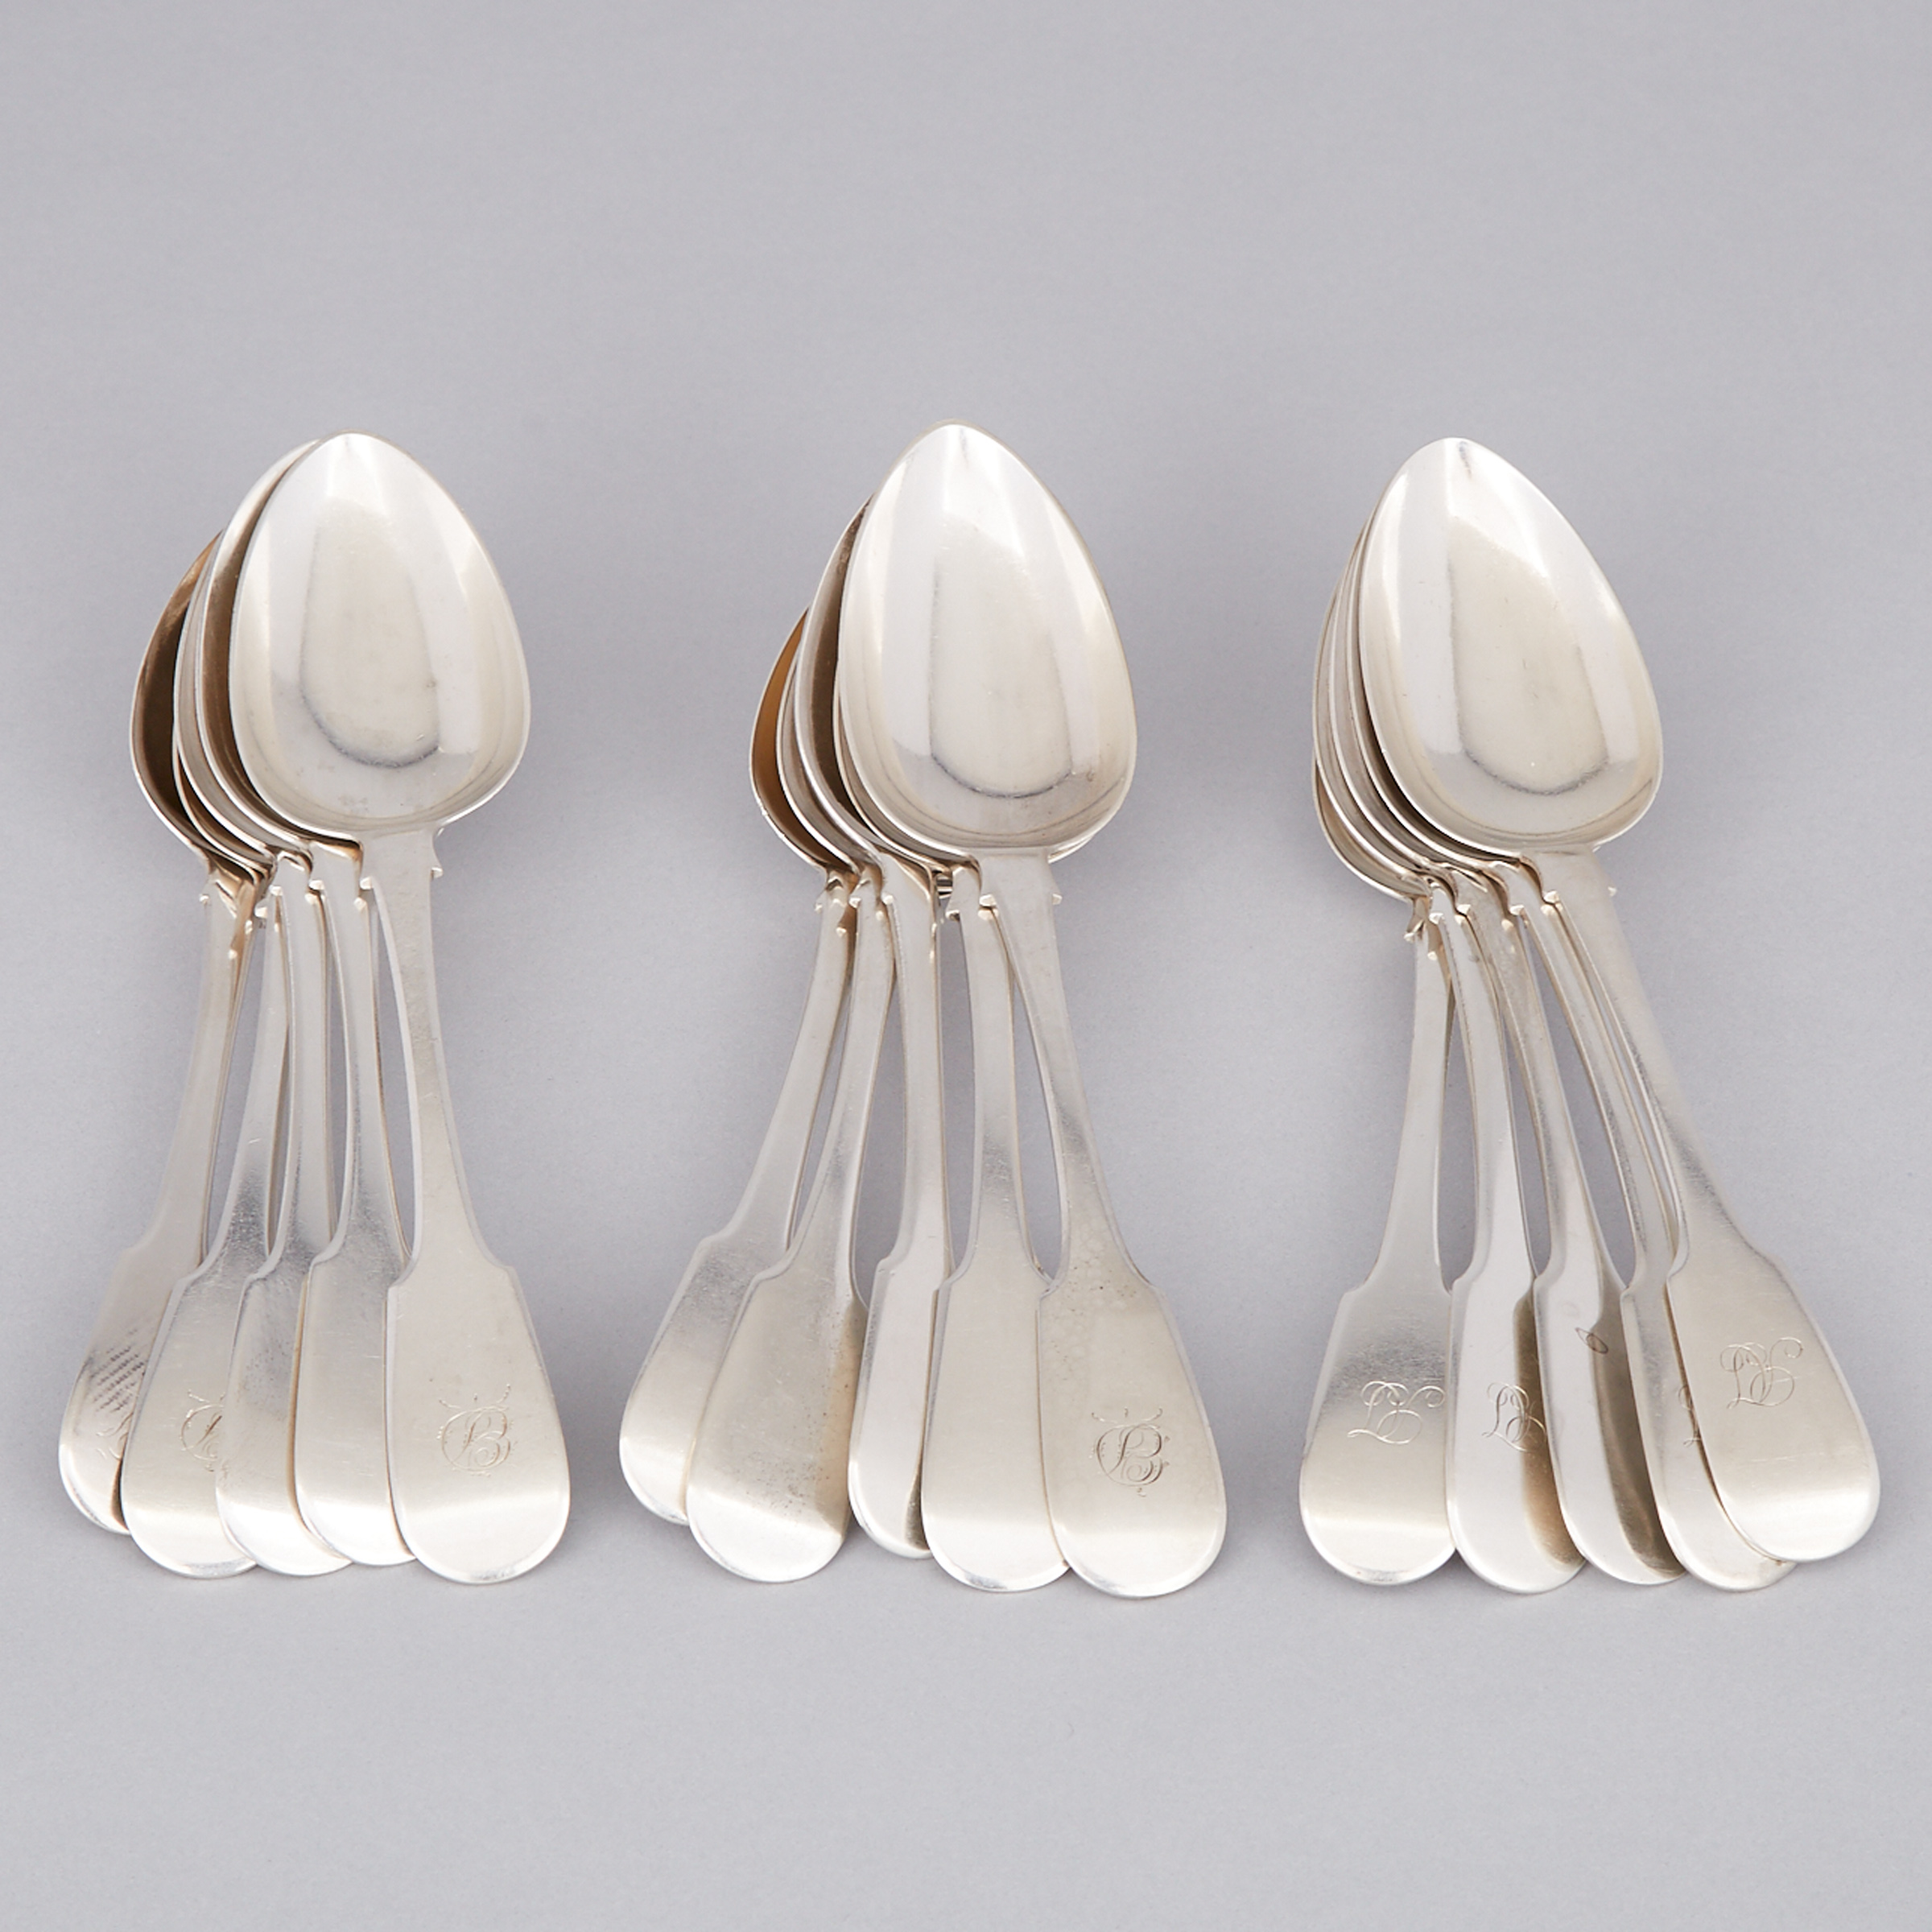 Fifteen Canadian Silver Fiddle Pattern Table Spoons, Laurent Amiot, Quebec City, Que., c.1820